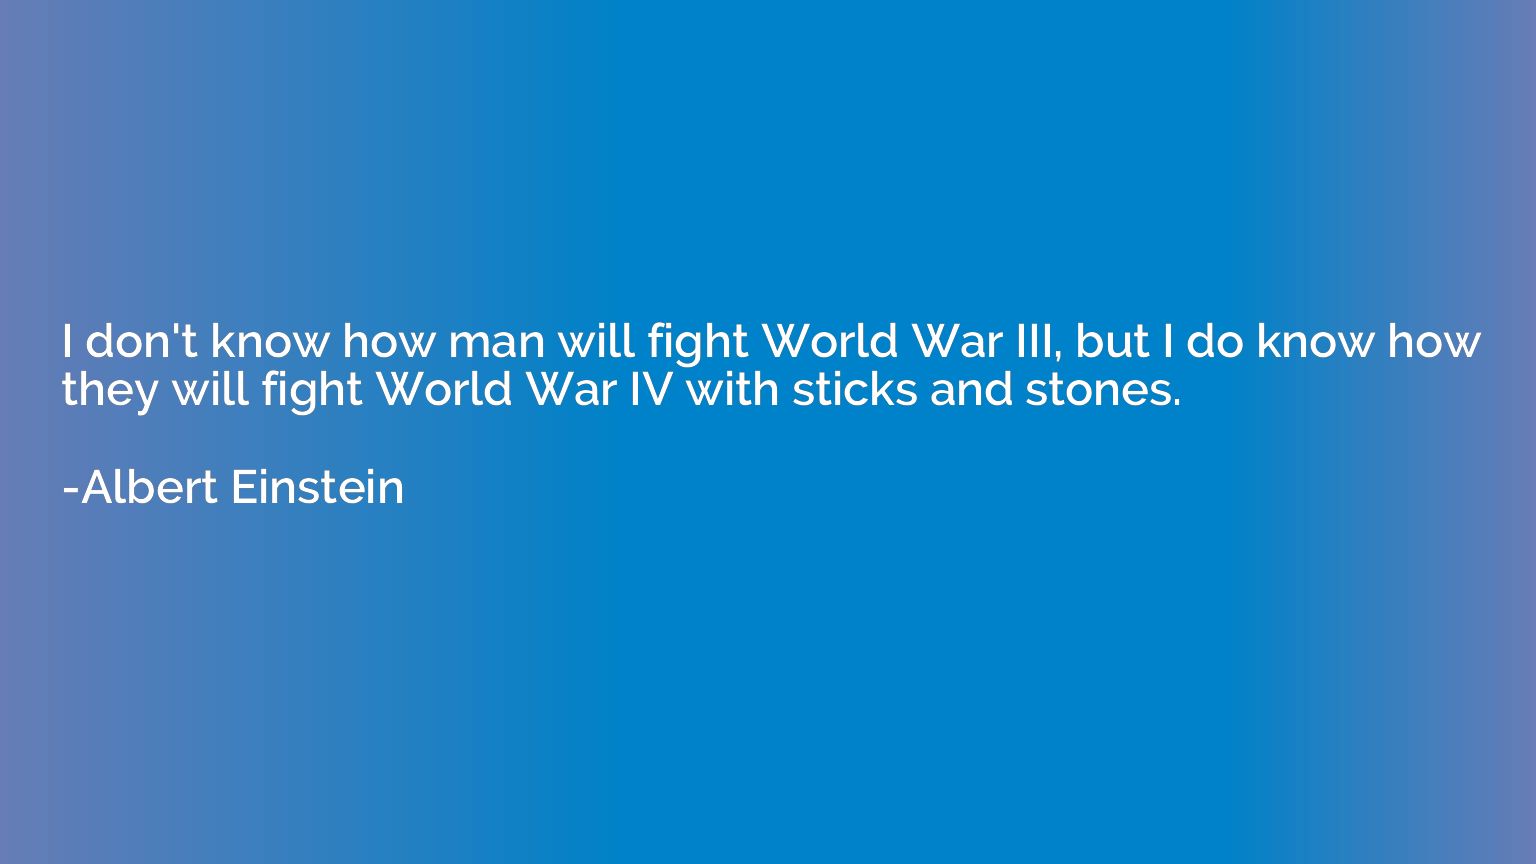 I don't know how man will fight World War III, but I do know